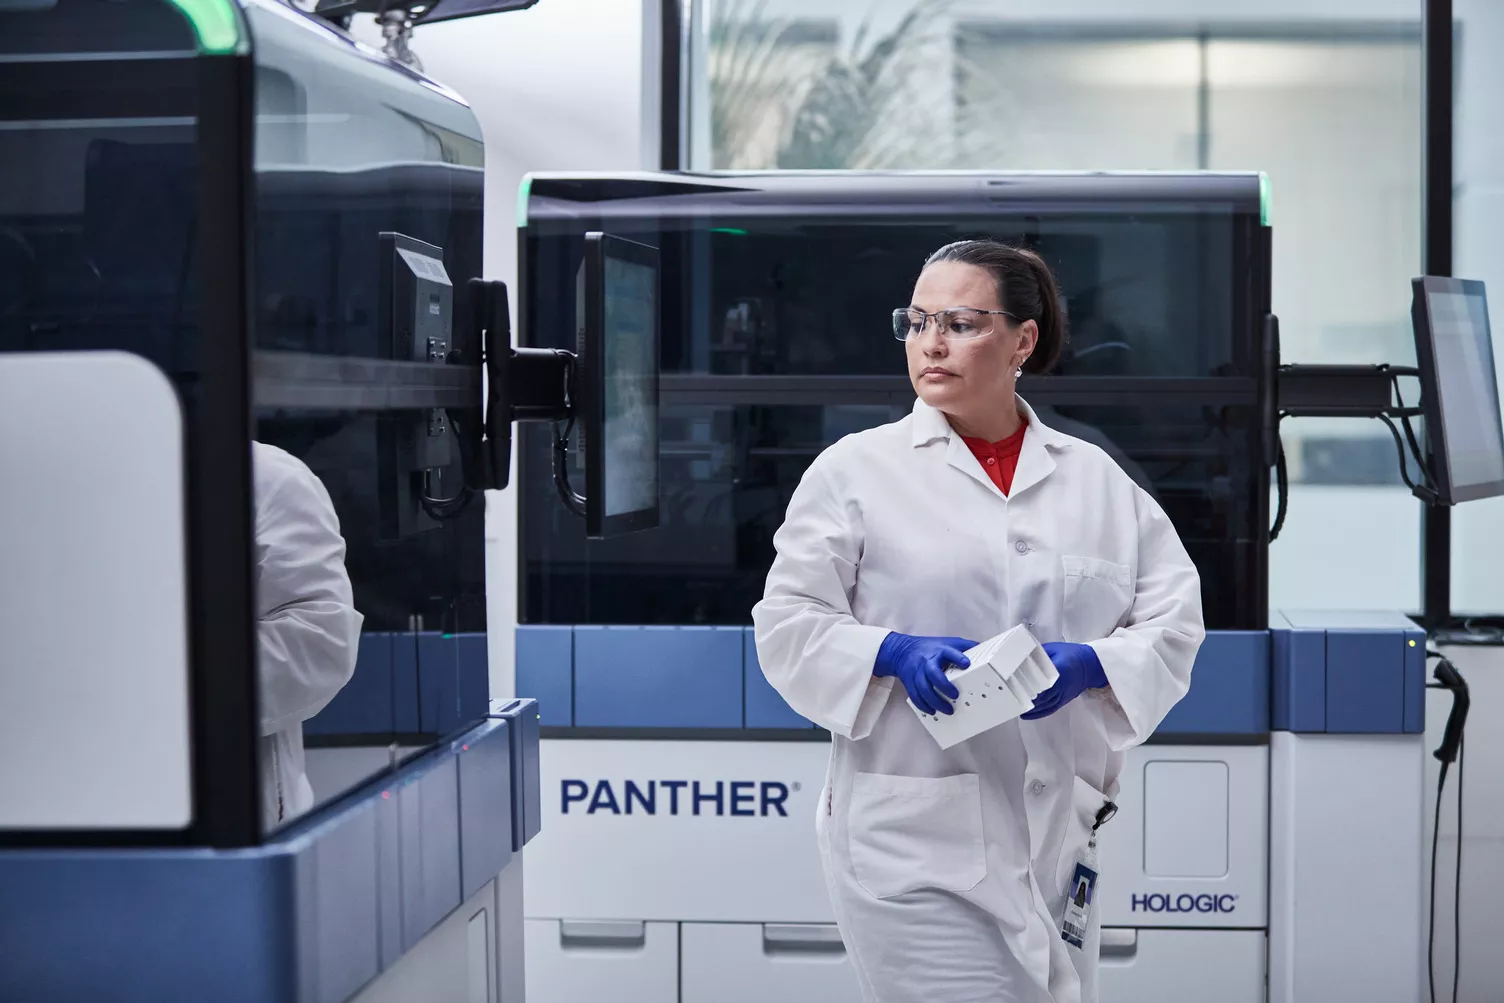 Female lab technician observing Panther systems in a lab setting